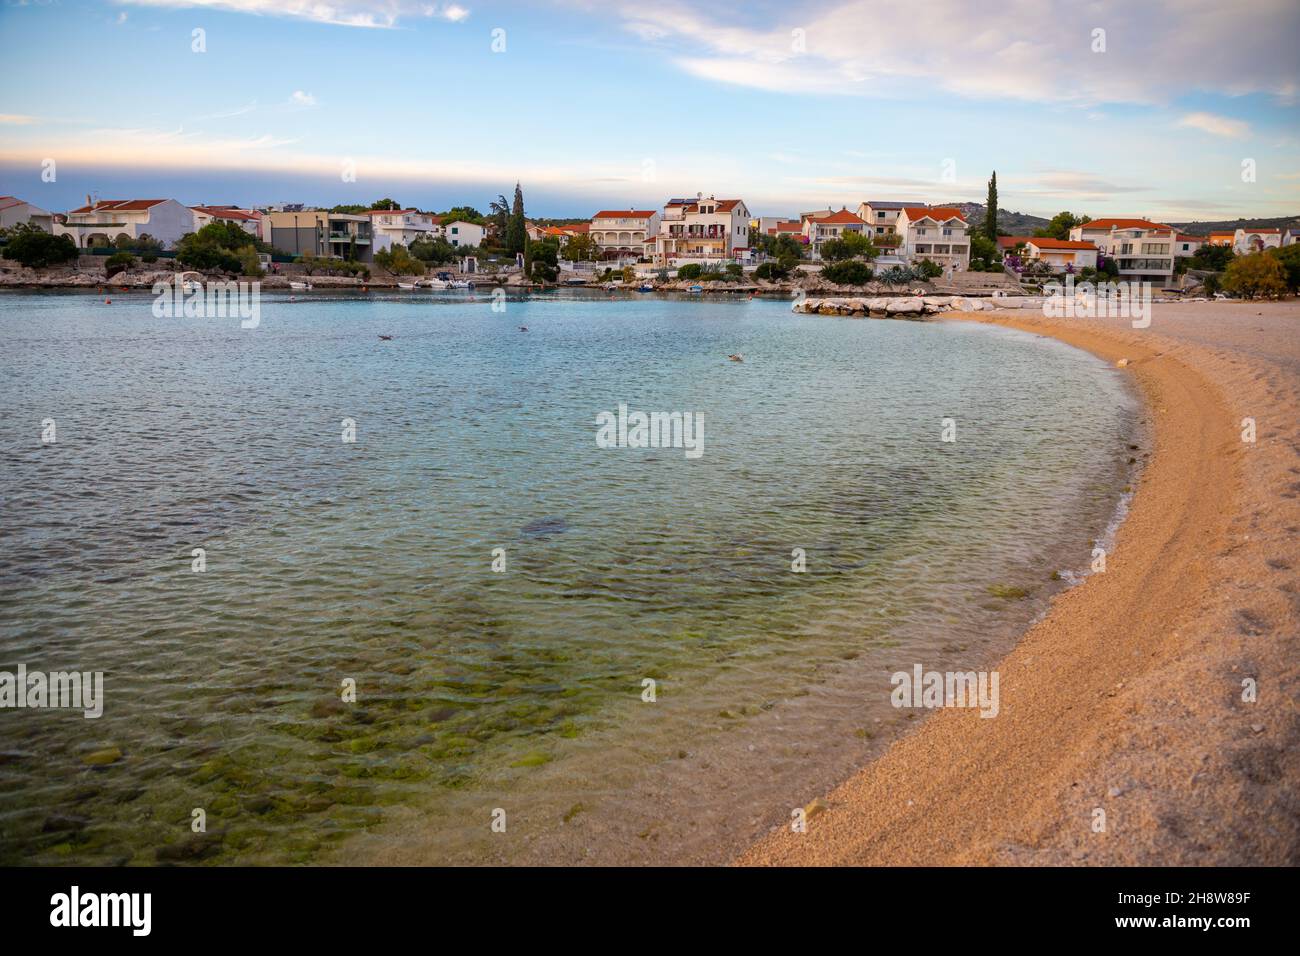 Rogoznica, Croatia - October 12, 2021: Beautiful area Lozica of Rogoznica town with sandy beach, white architecture and fishing boats at sunset time Stock Photo